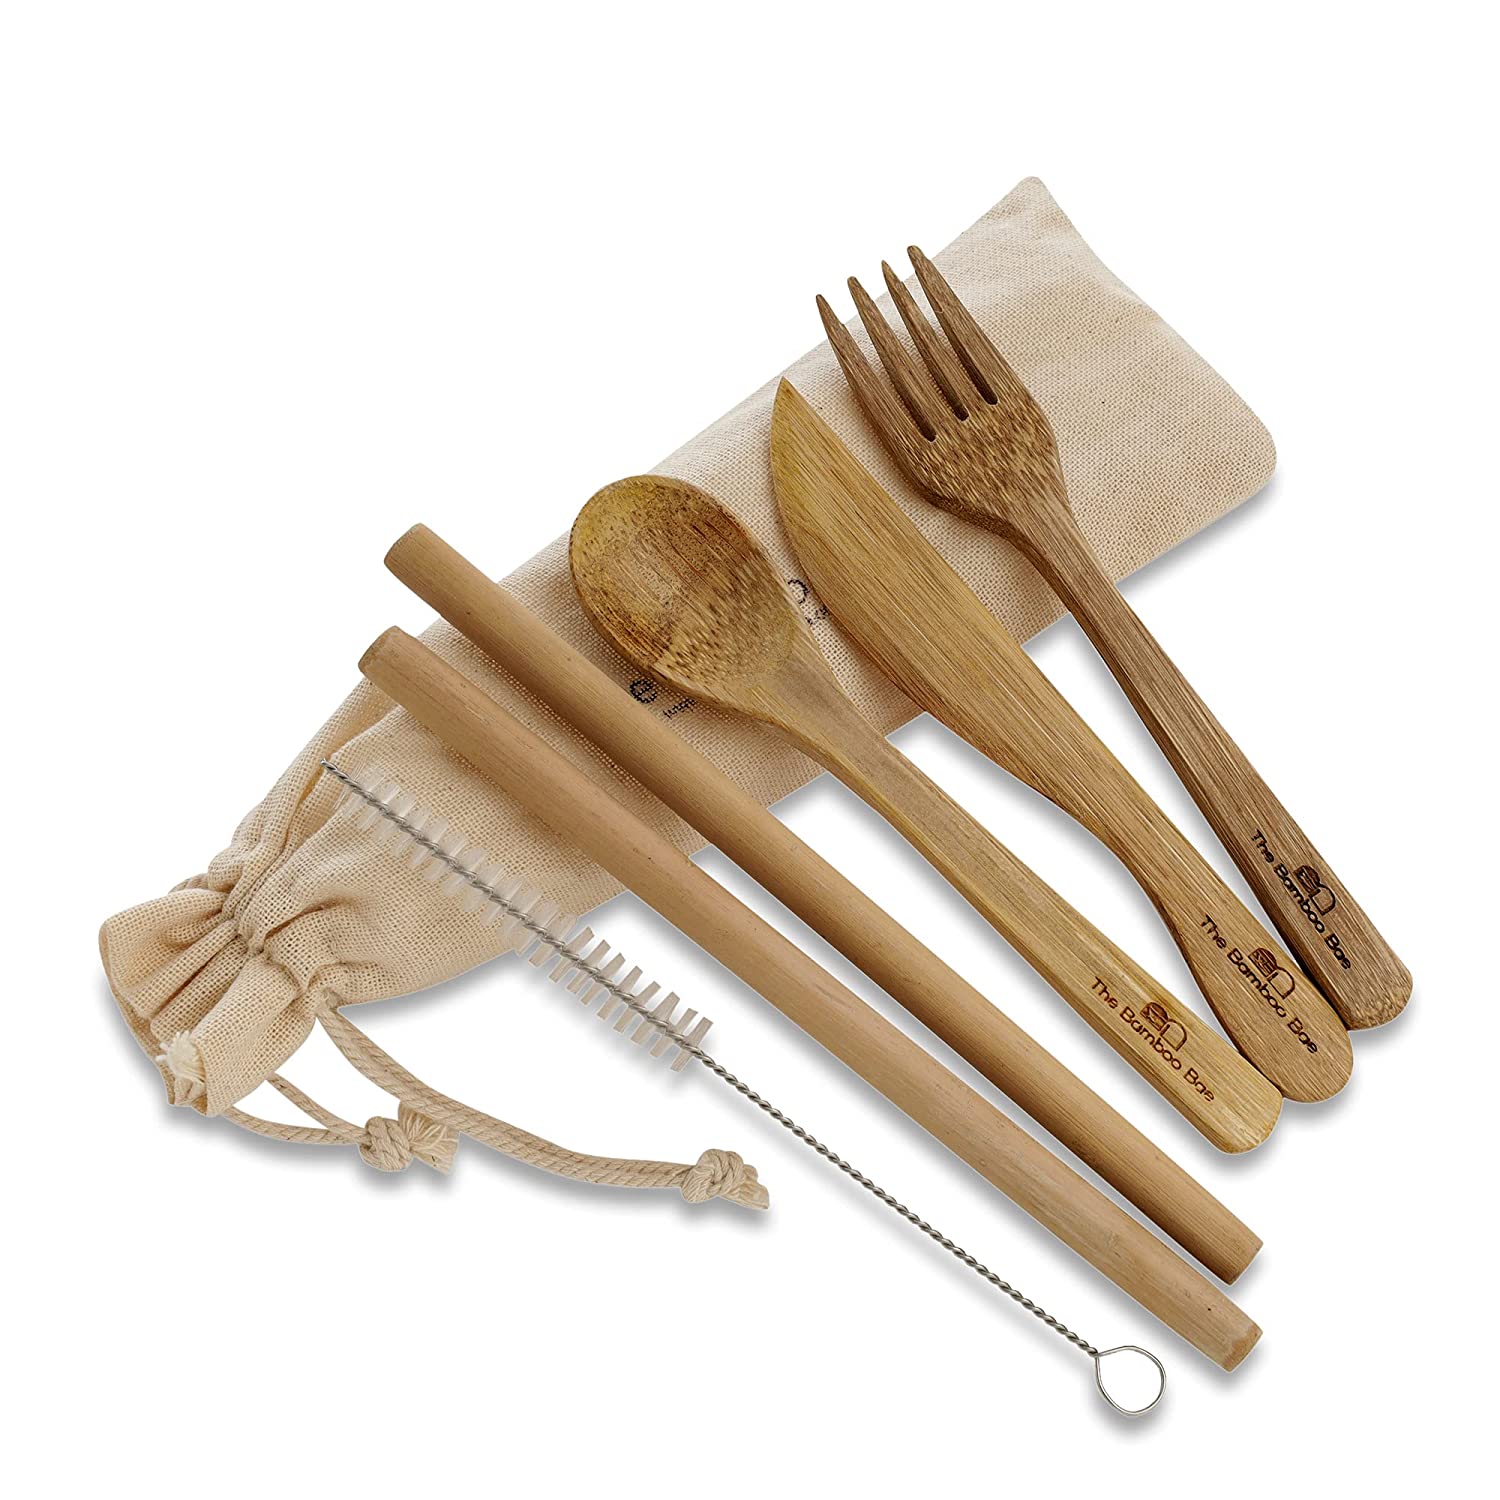 TOP FIVE BENEFITS OF USING REUSABLE BAMBOO CUTLERY!